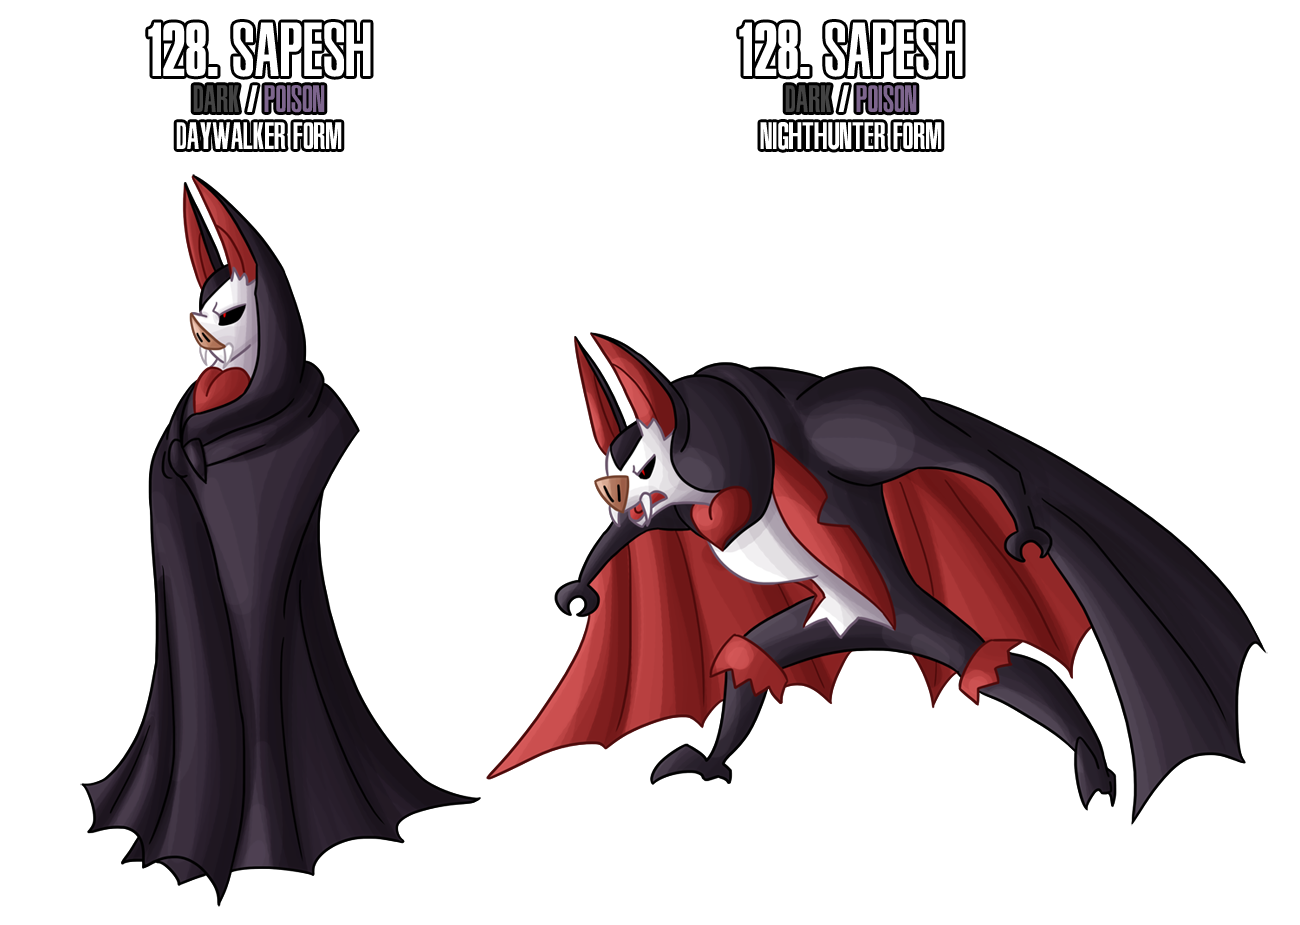 fakemon__128_by_masterthecreater-d4t7b8g.png